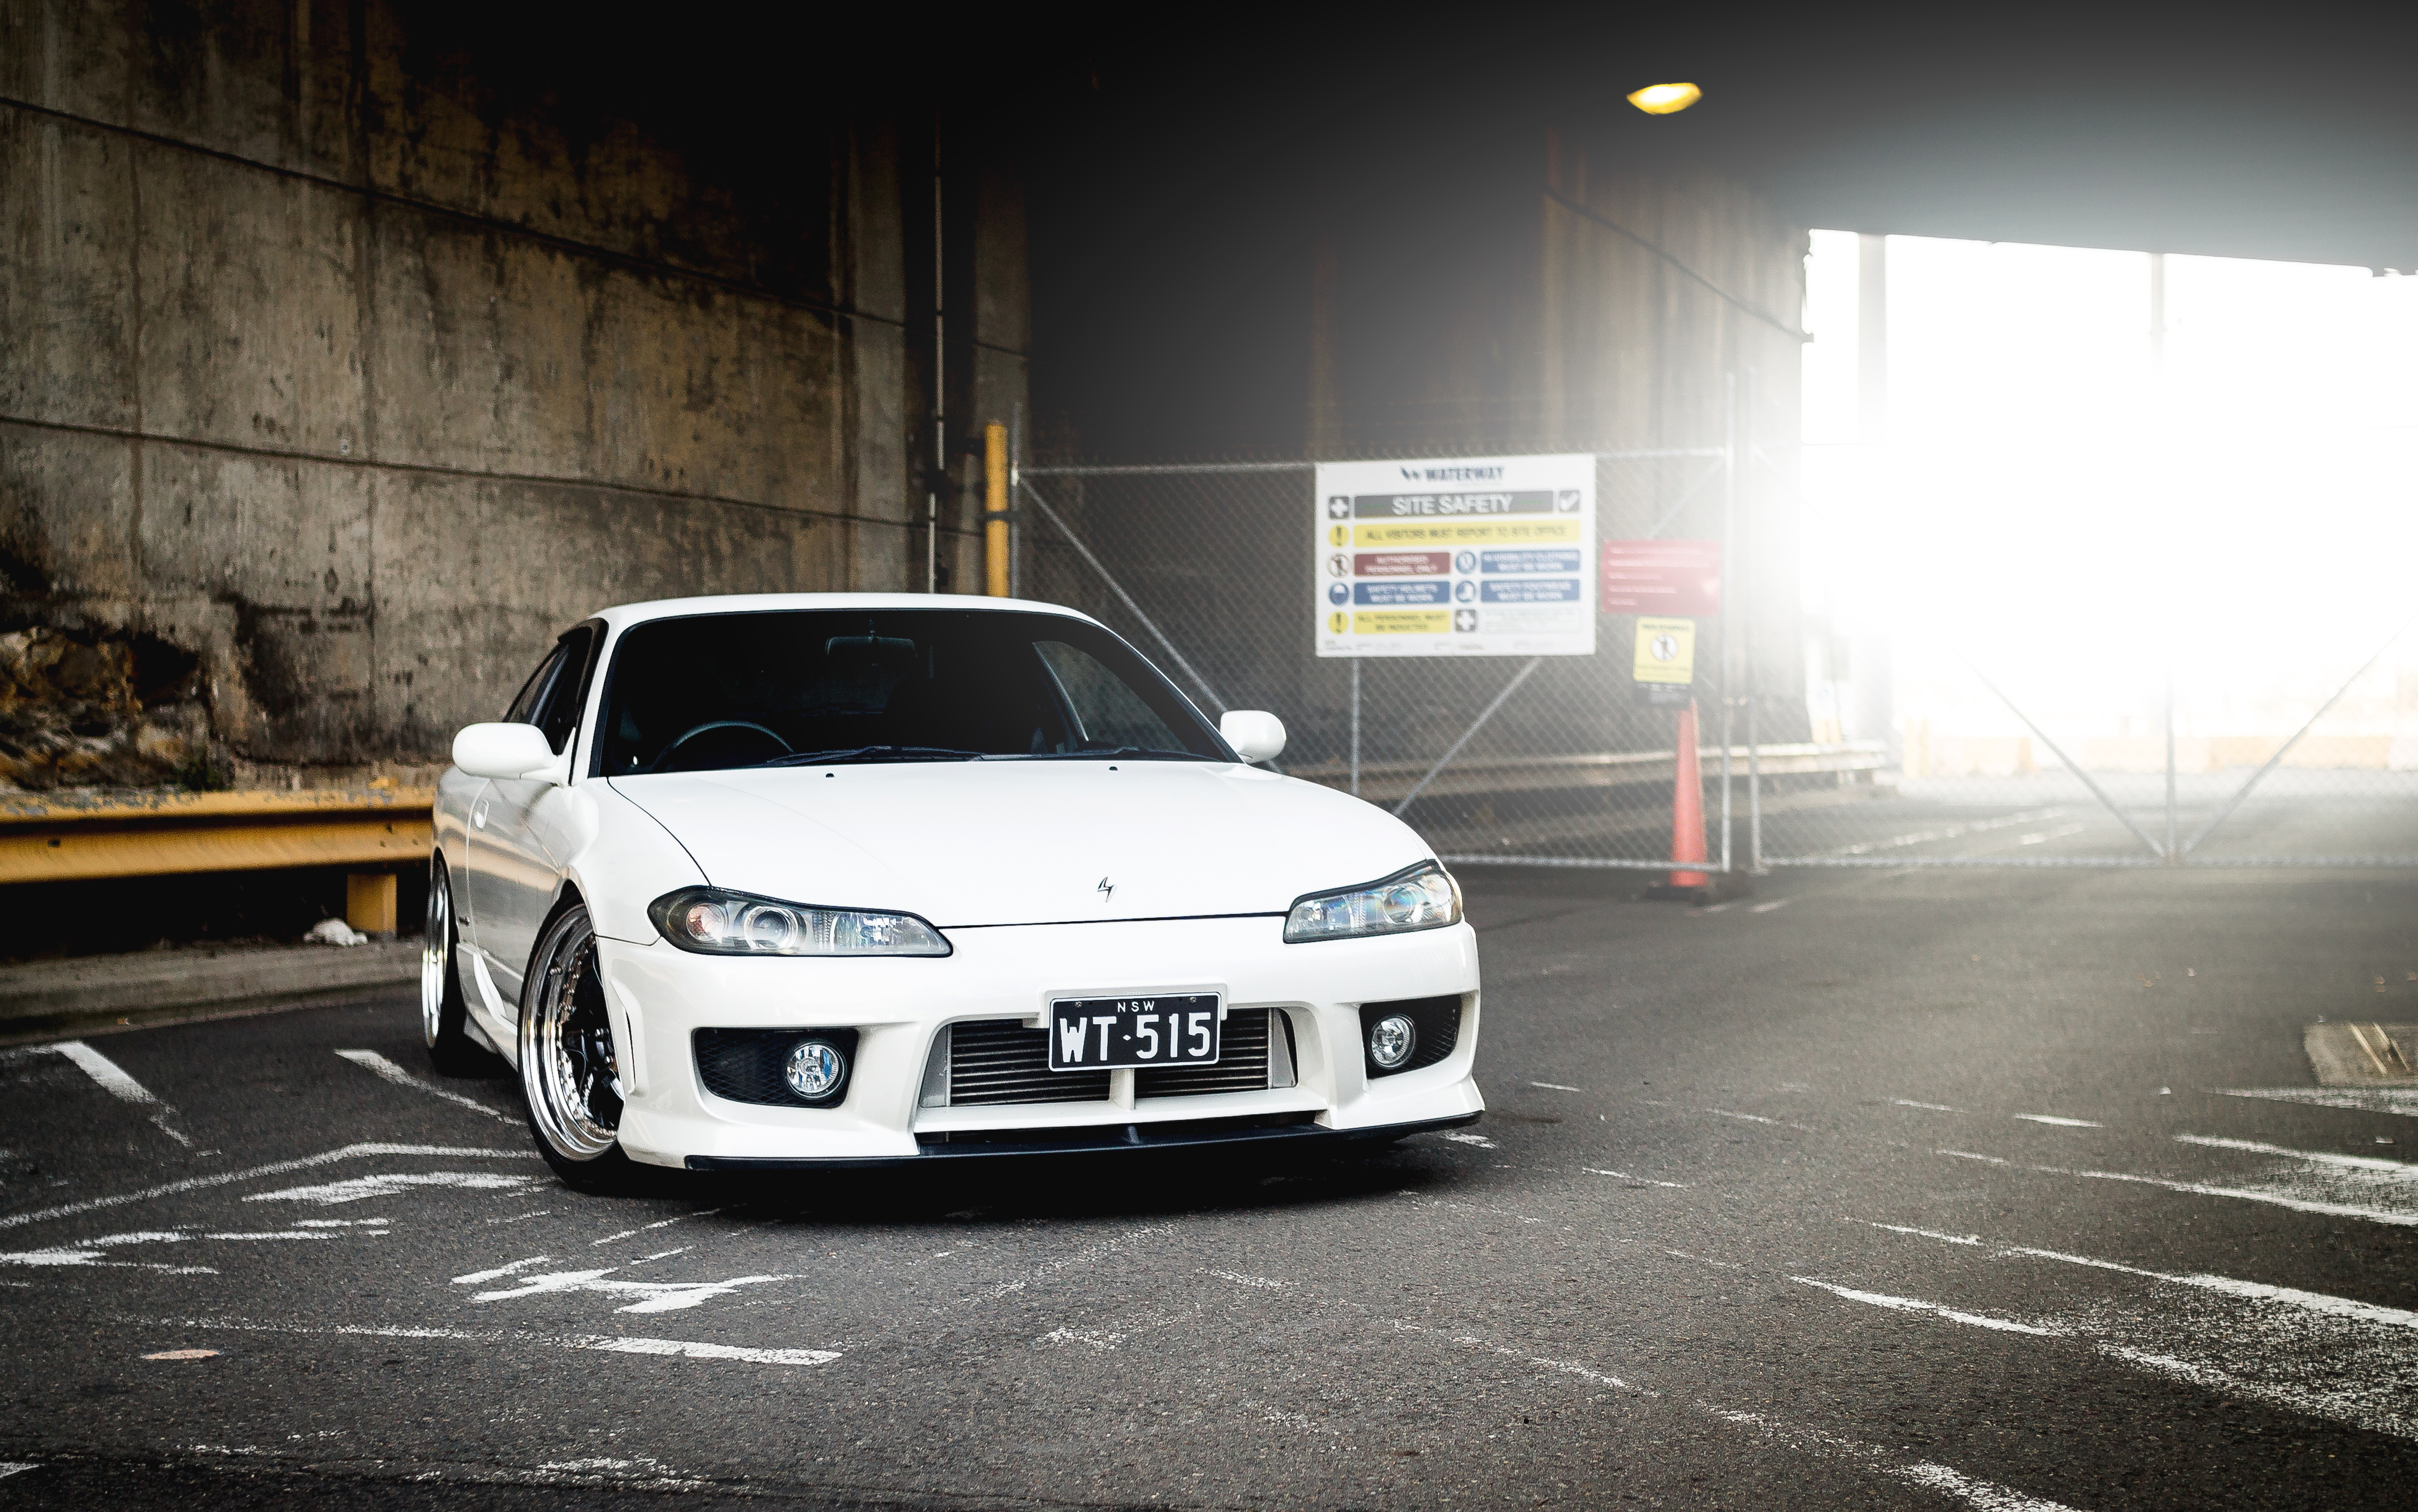 Nissan Silvia S15 4k Ultra HD Wallpaper And Background